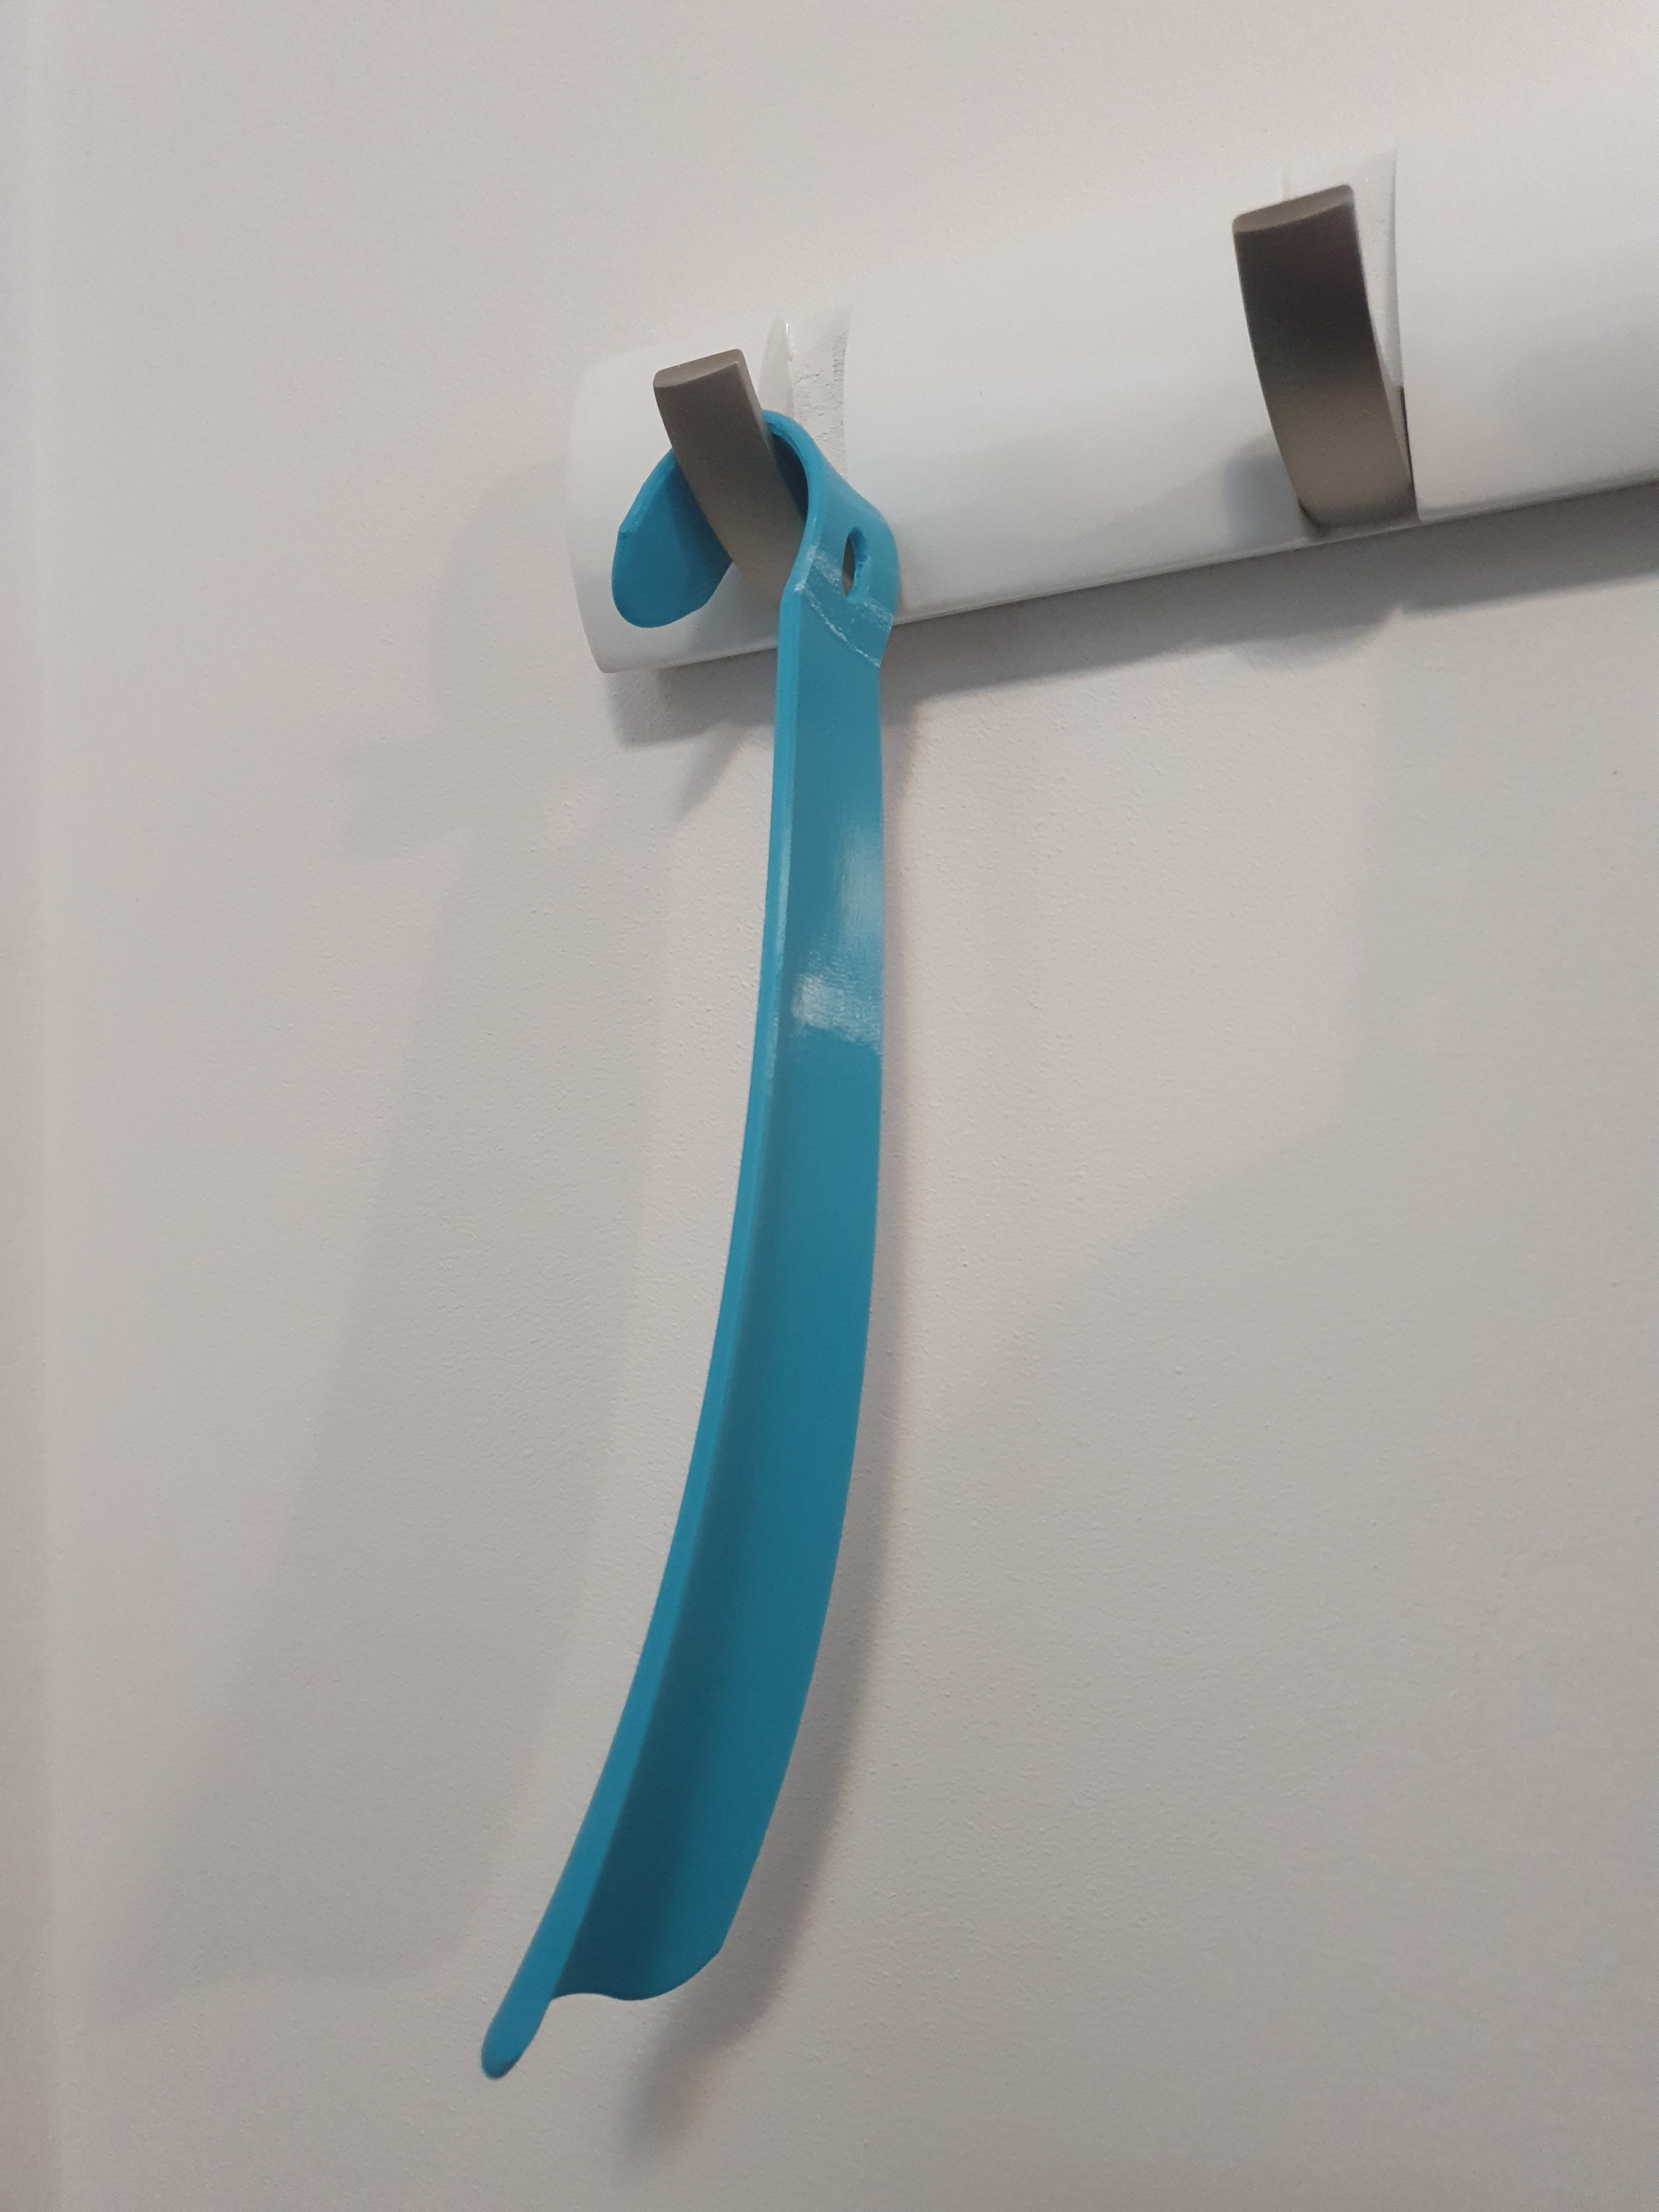 Large unsupported shoe horn with angled end for hanging